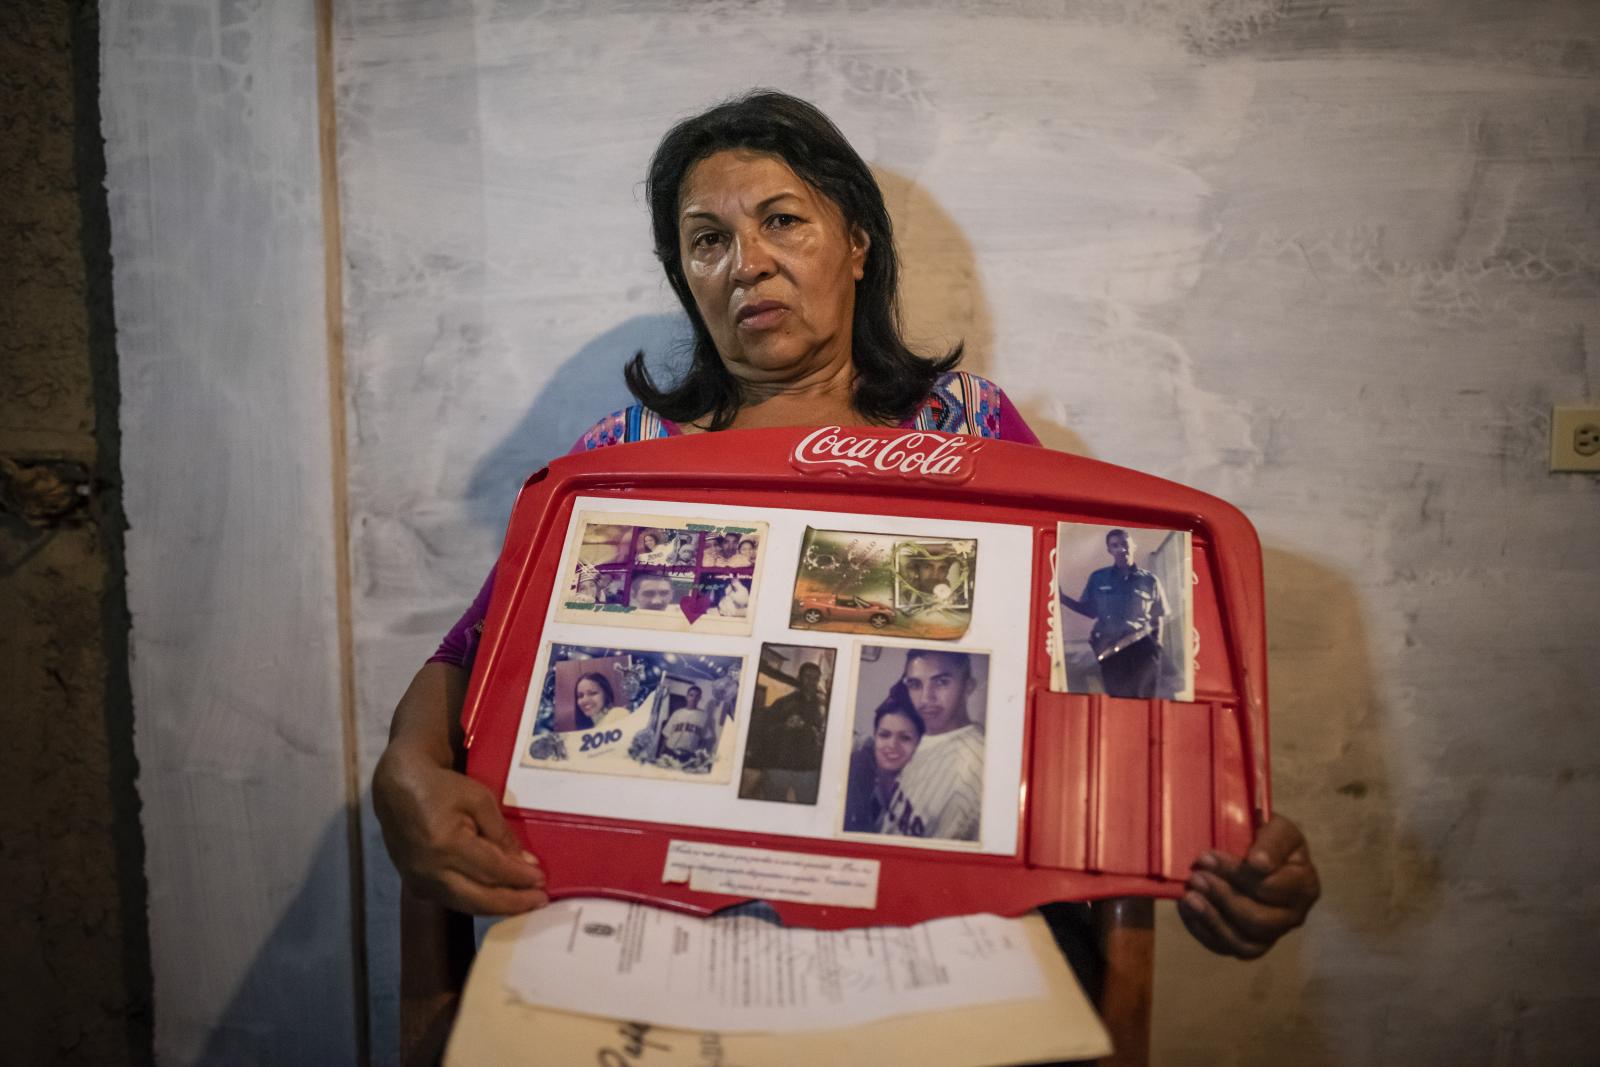 Between violence and justice - The mother of a murdered young man shows a picture with...